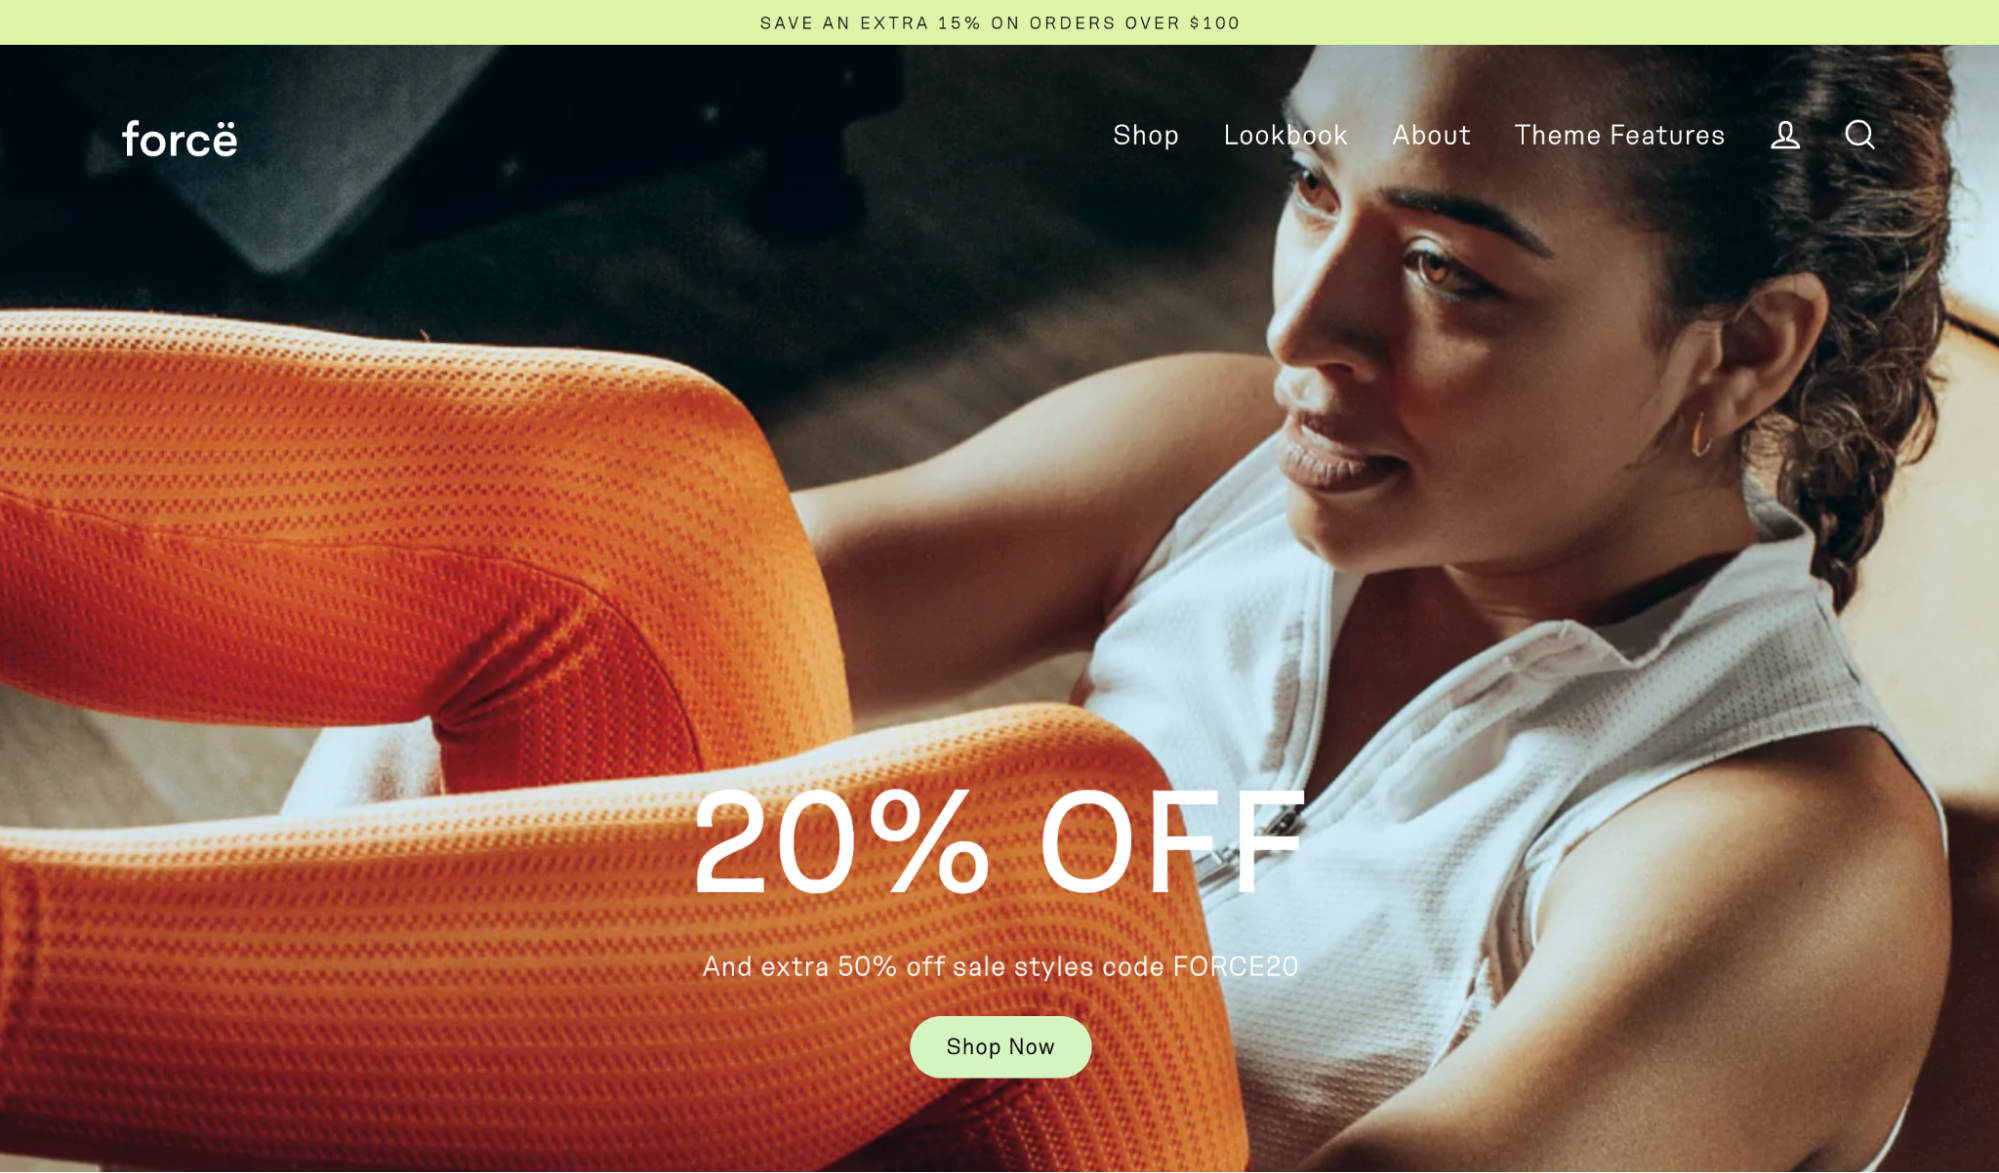 shopify theme Streamline, showing full page image of someone working out